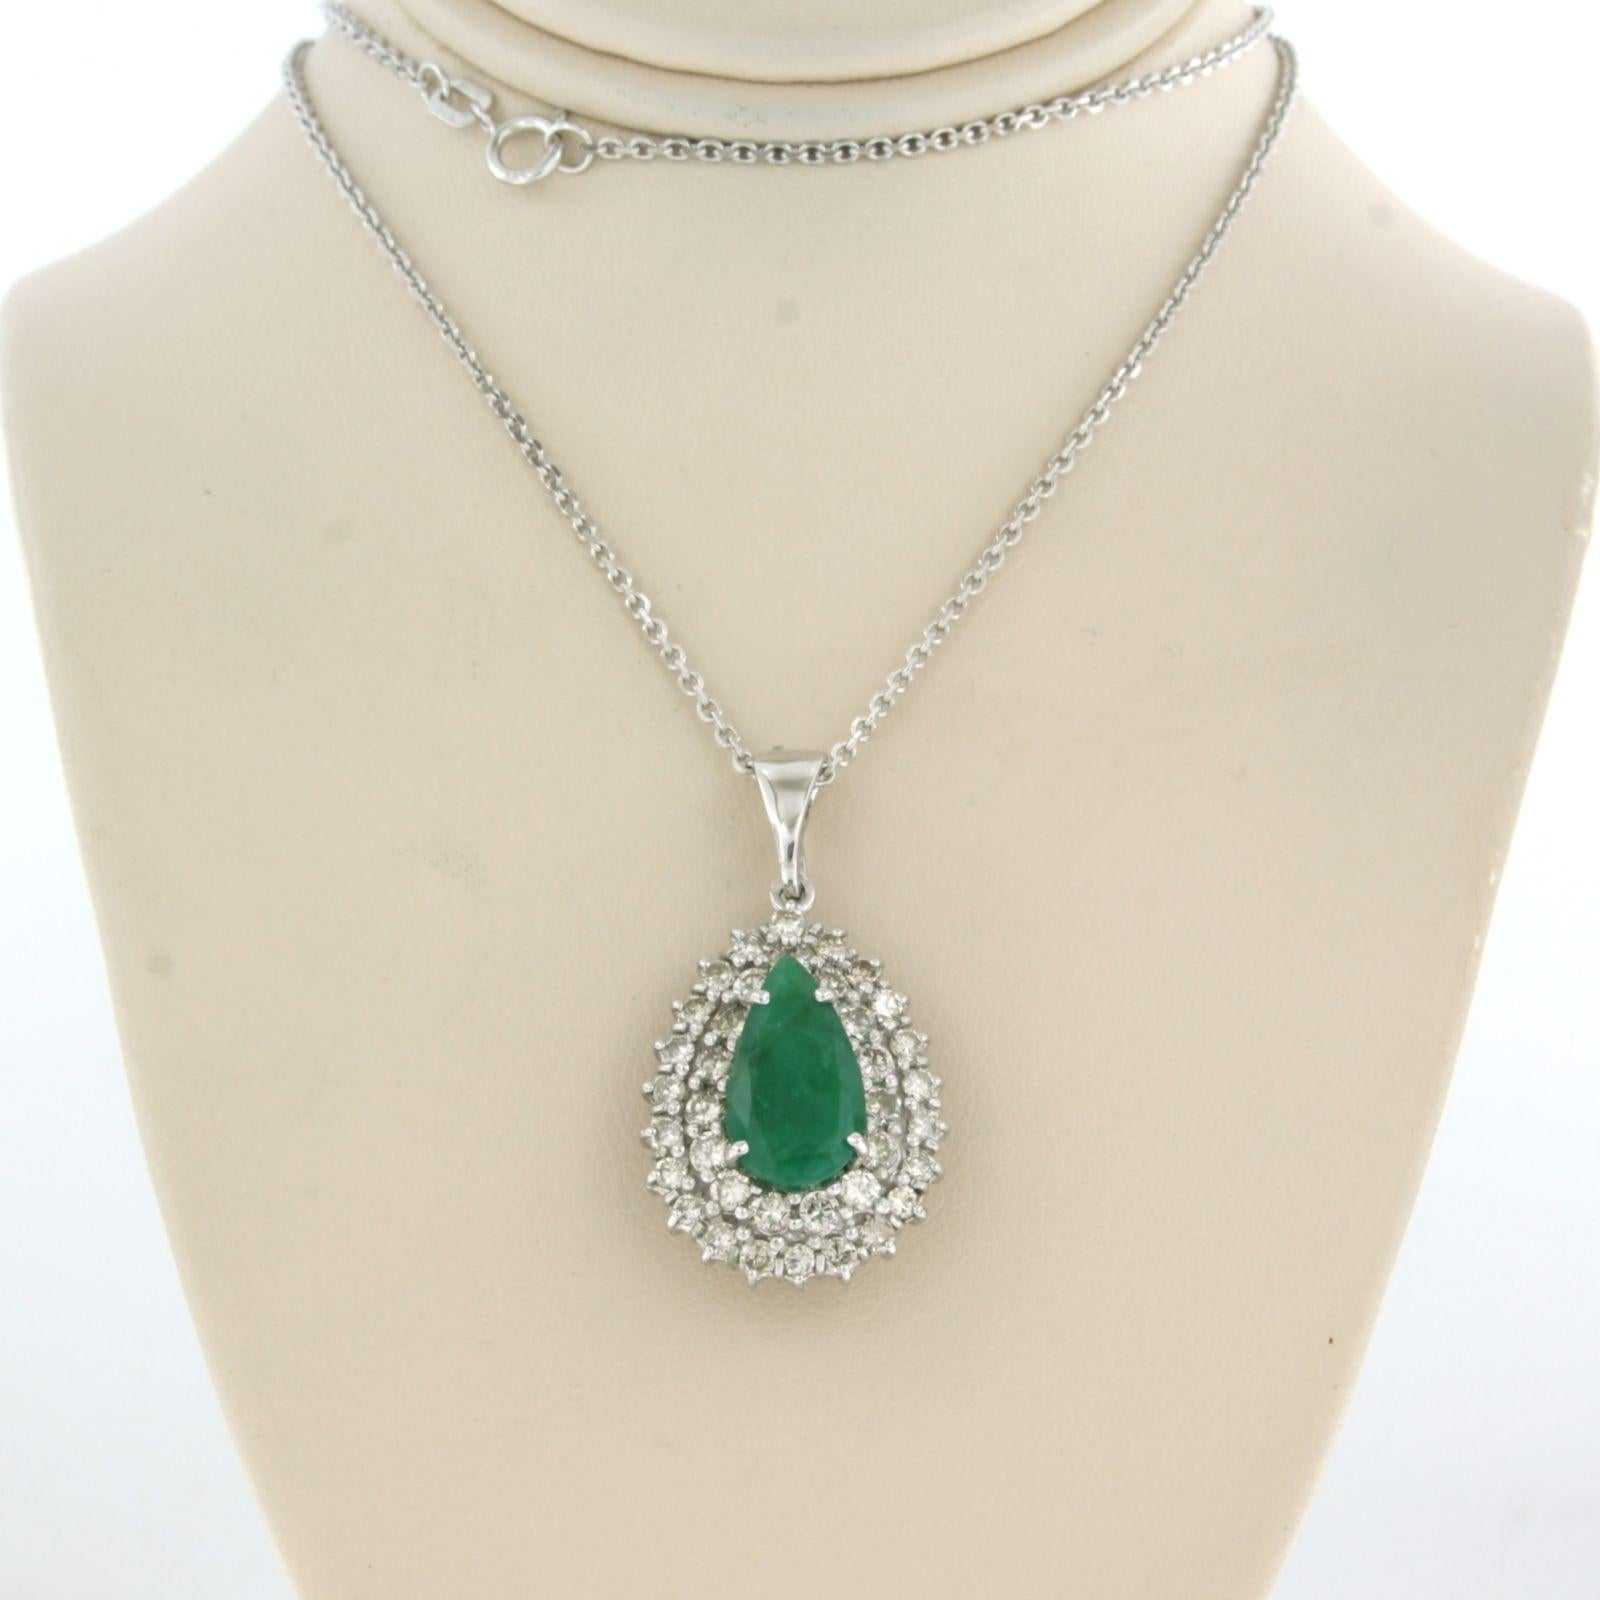 14k white gold necklace with pendant set with emerald and brilliant cut diamond. 1.20ct - G/H - VS/SI - 45 cm long

detailed description:

the length of the necklace is 45 cm long by 1.5 mm wide

the size of the pendant is 3.3 cm by 1.7 cm